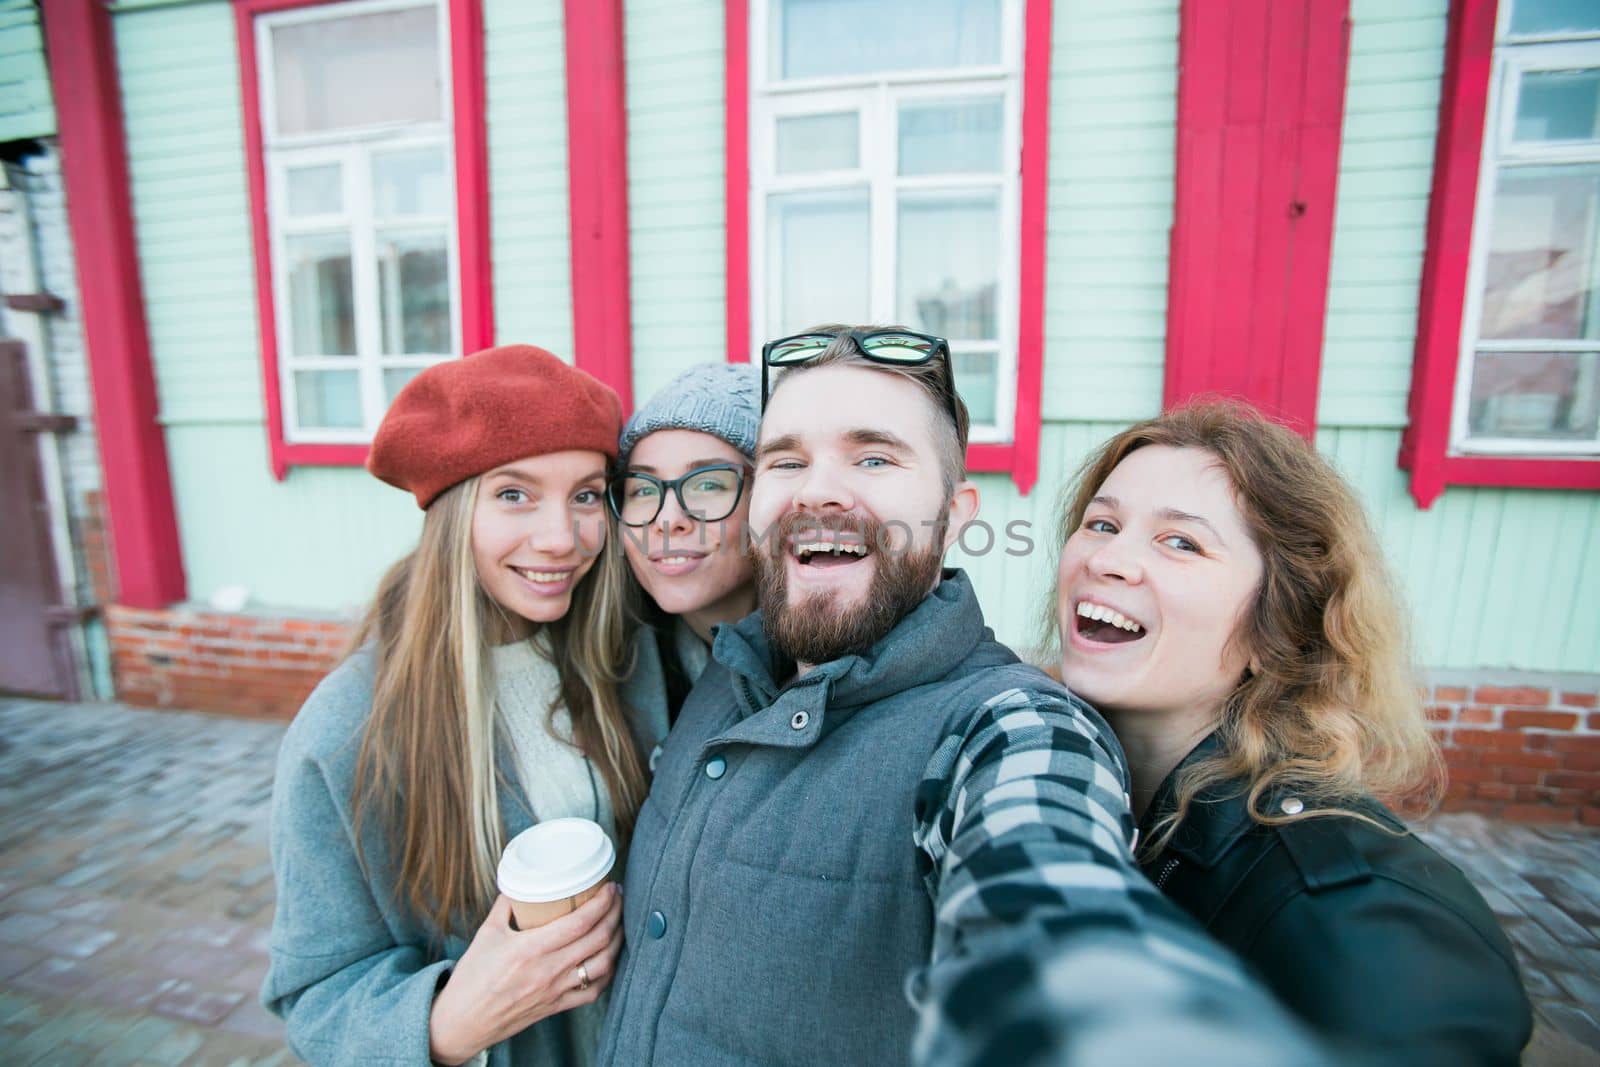 Group of happy young friends having fun on city street and taking selfie - friendship and photographing concept by Satura86